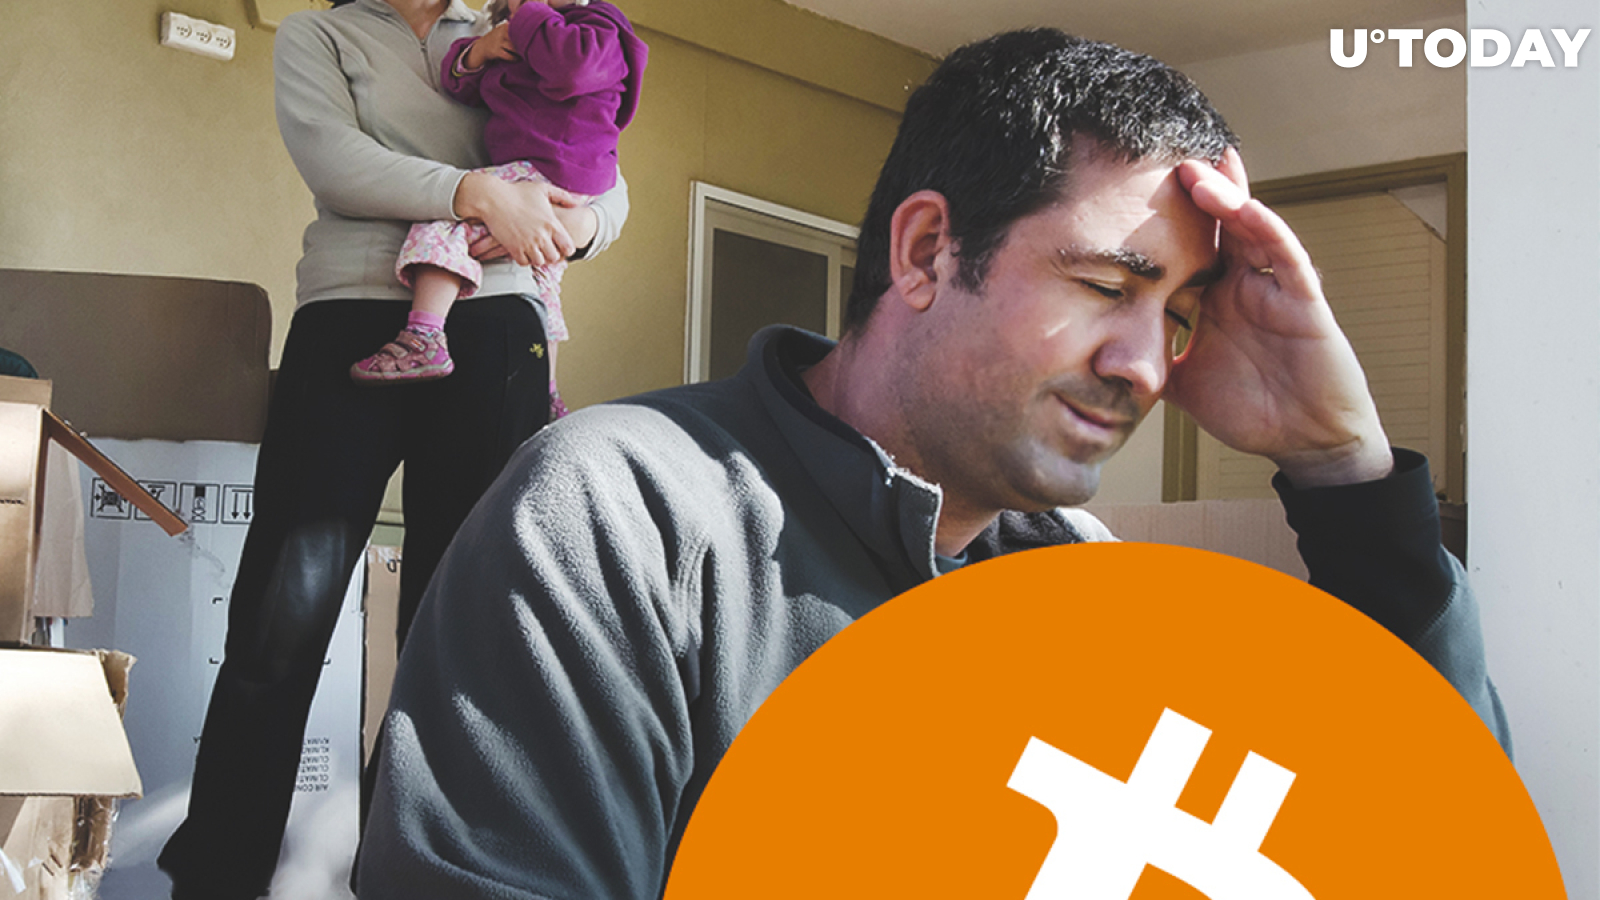 This Man Left His Family Homeless After Going All-In on Bitcoin, but He Has No Regrets